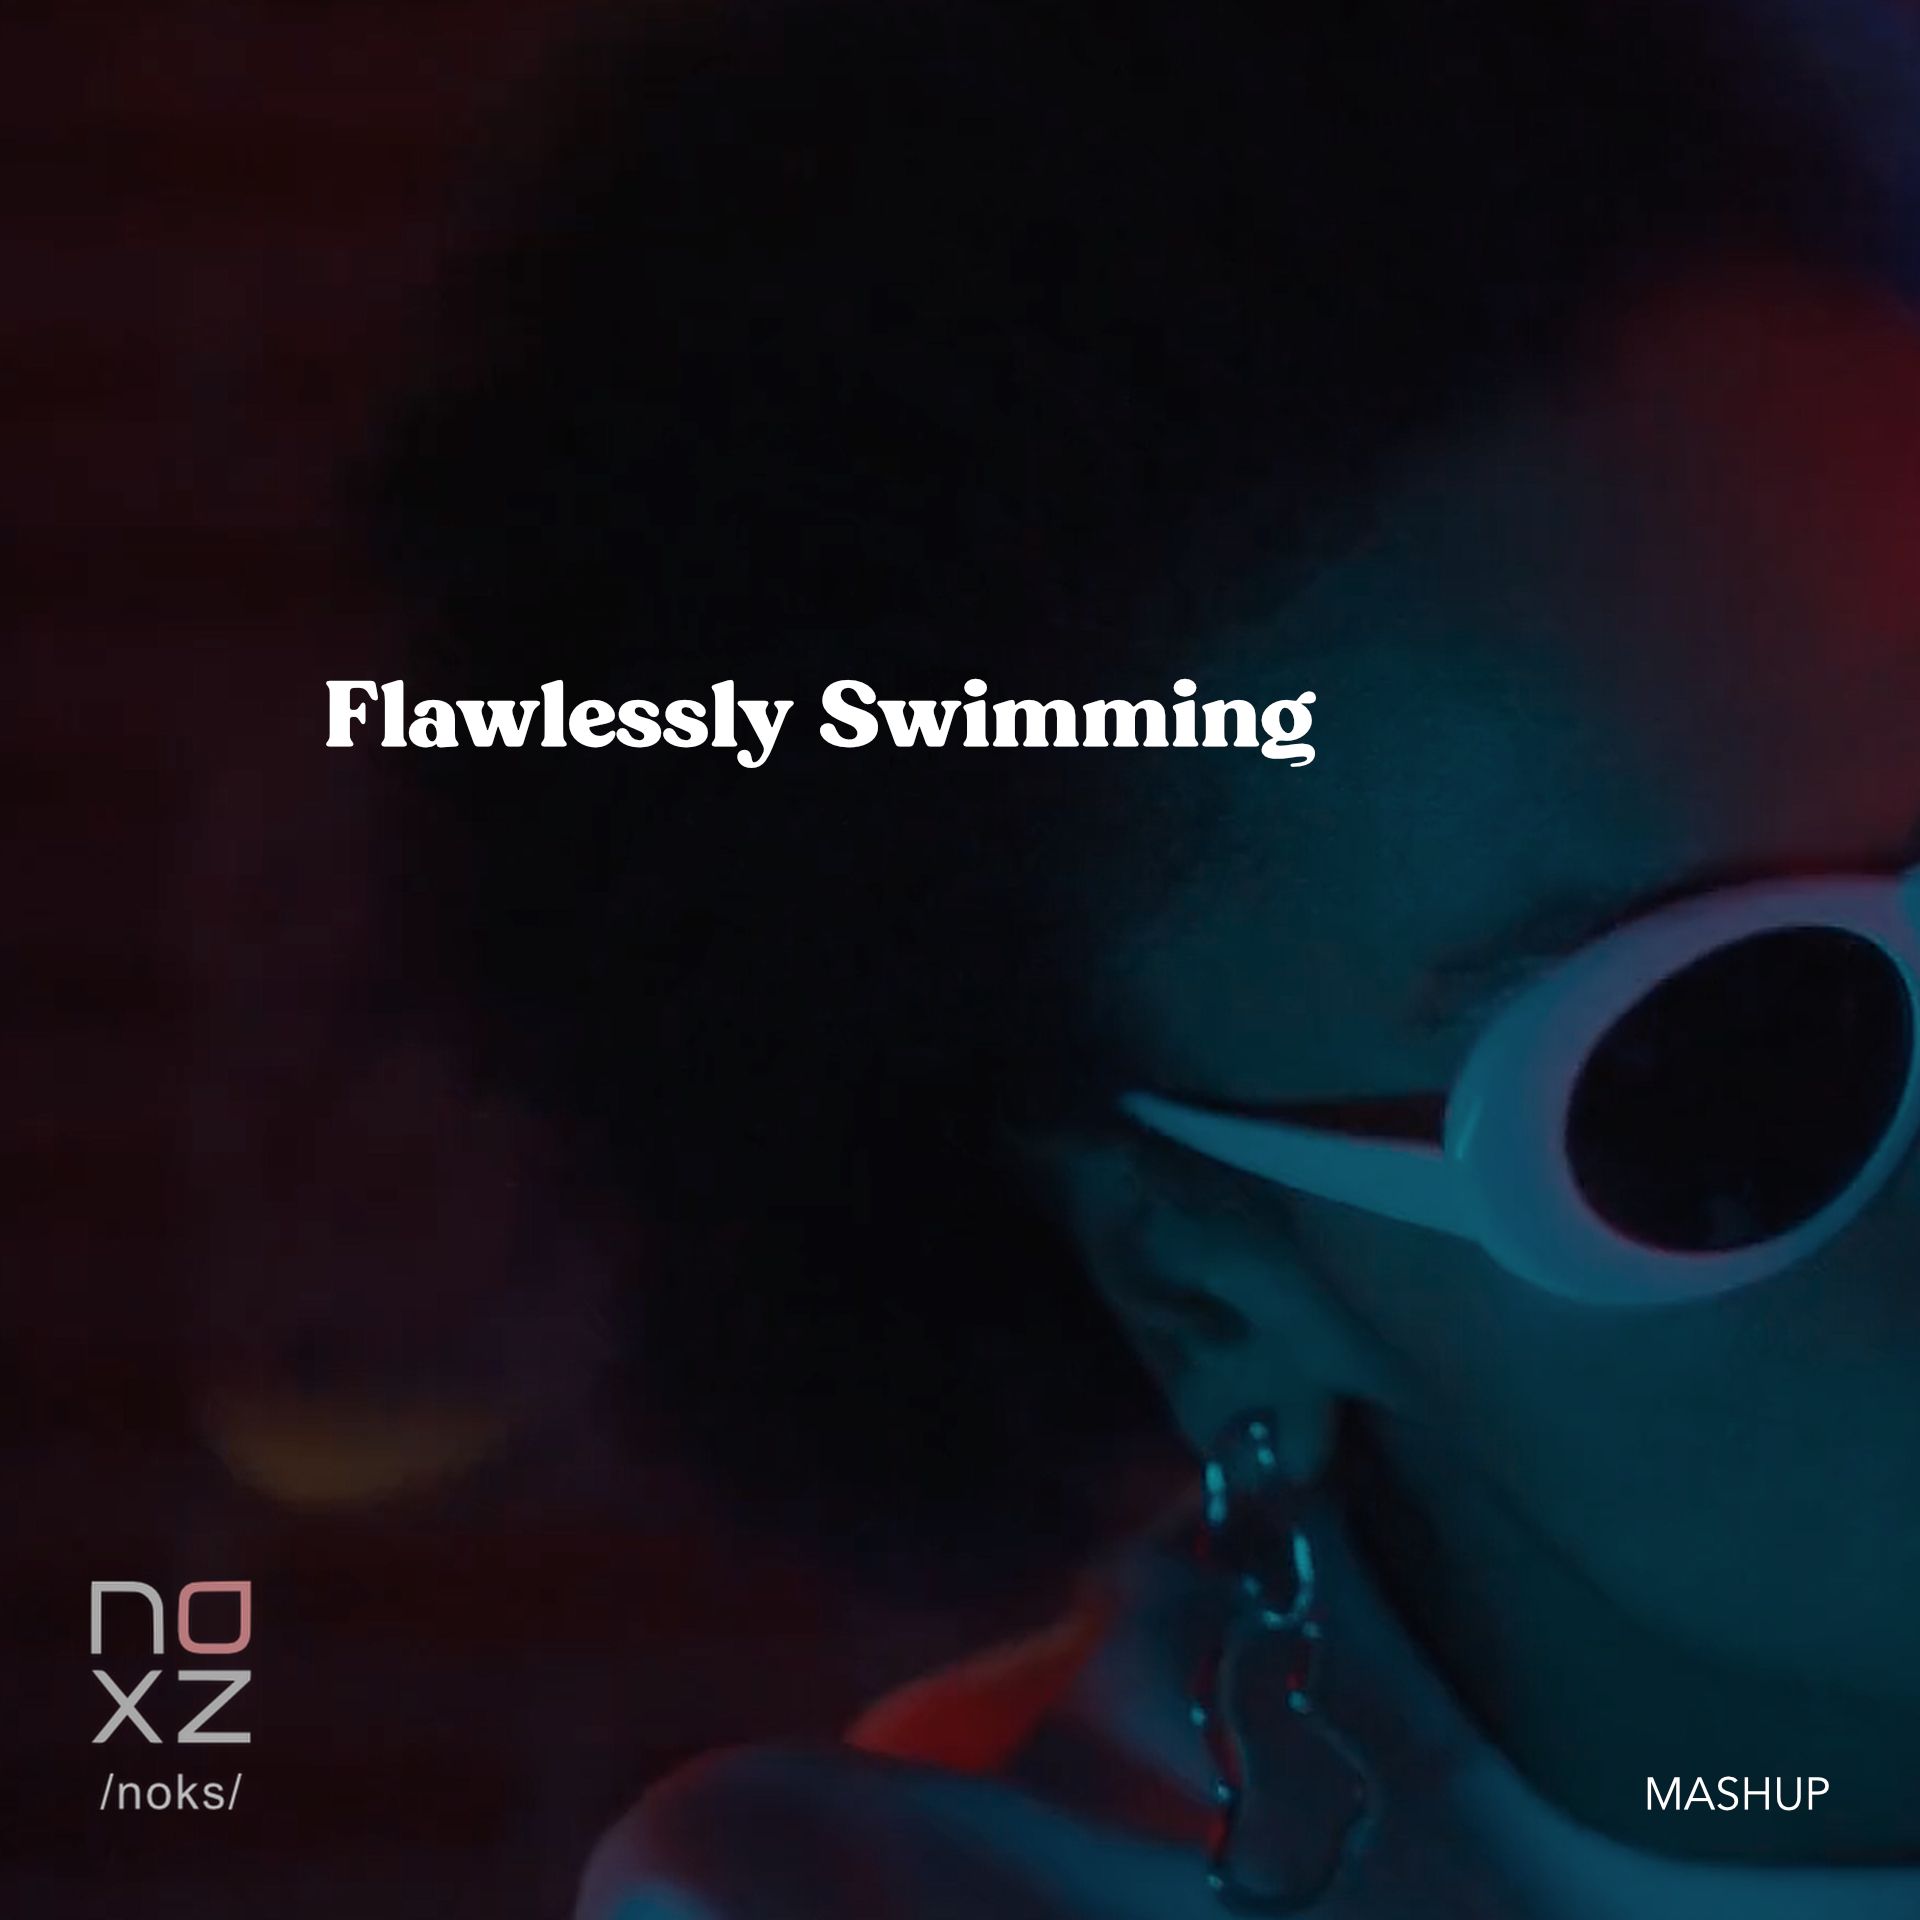 Download Flawlessly Swimming [MASHUP]